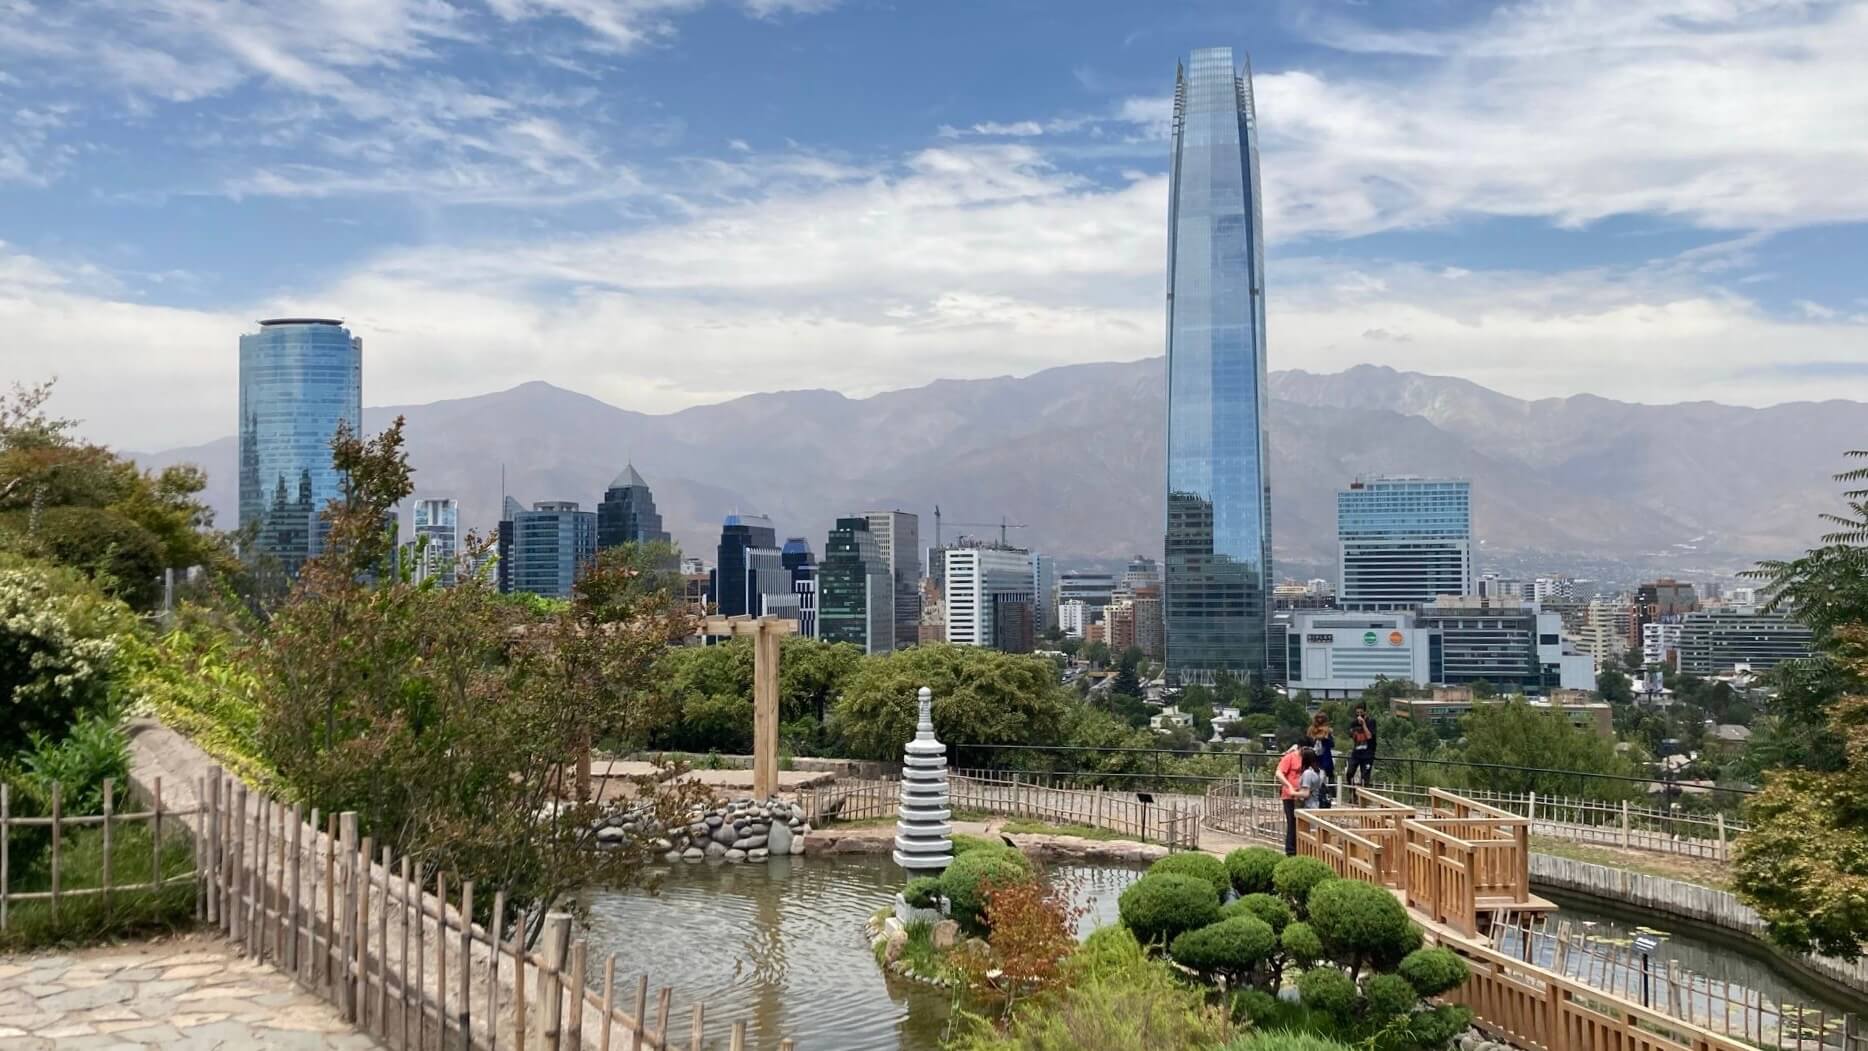 Santiago, Chile cityscape with a pond and green area in the foreground